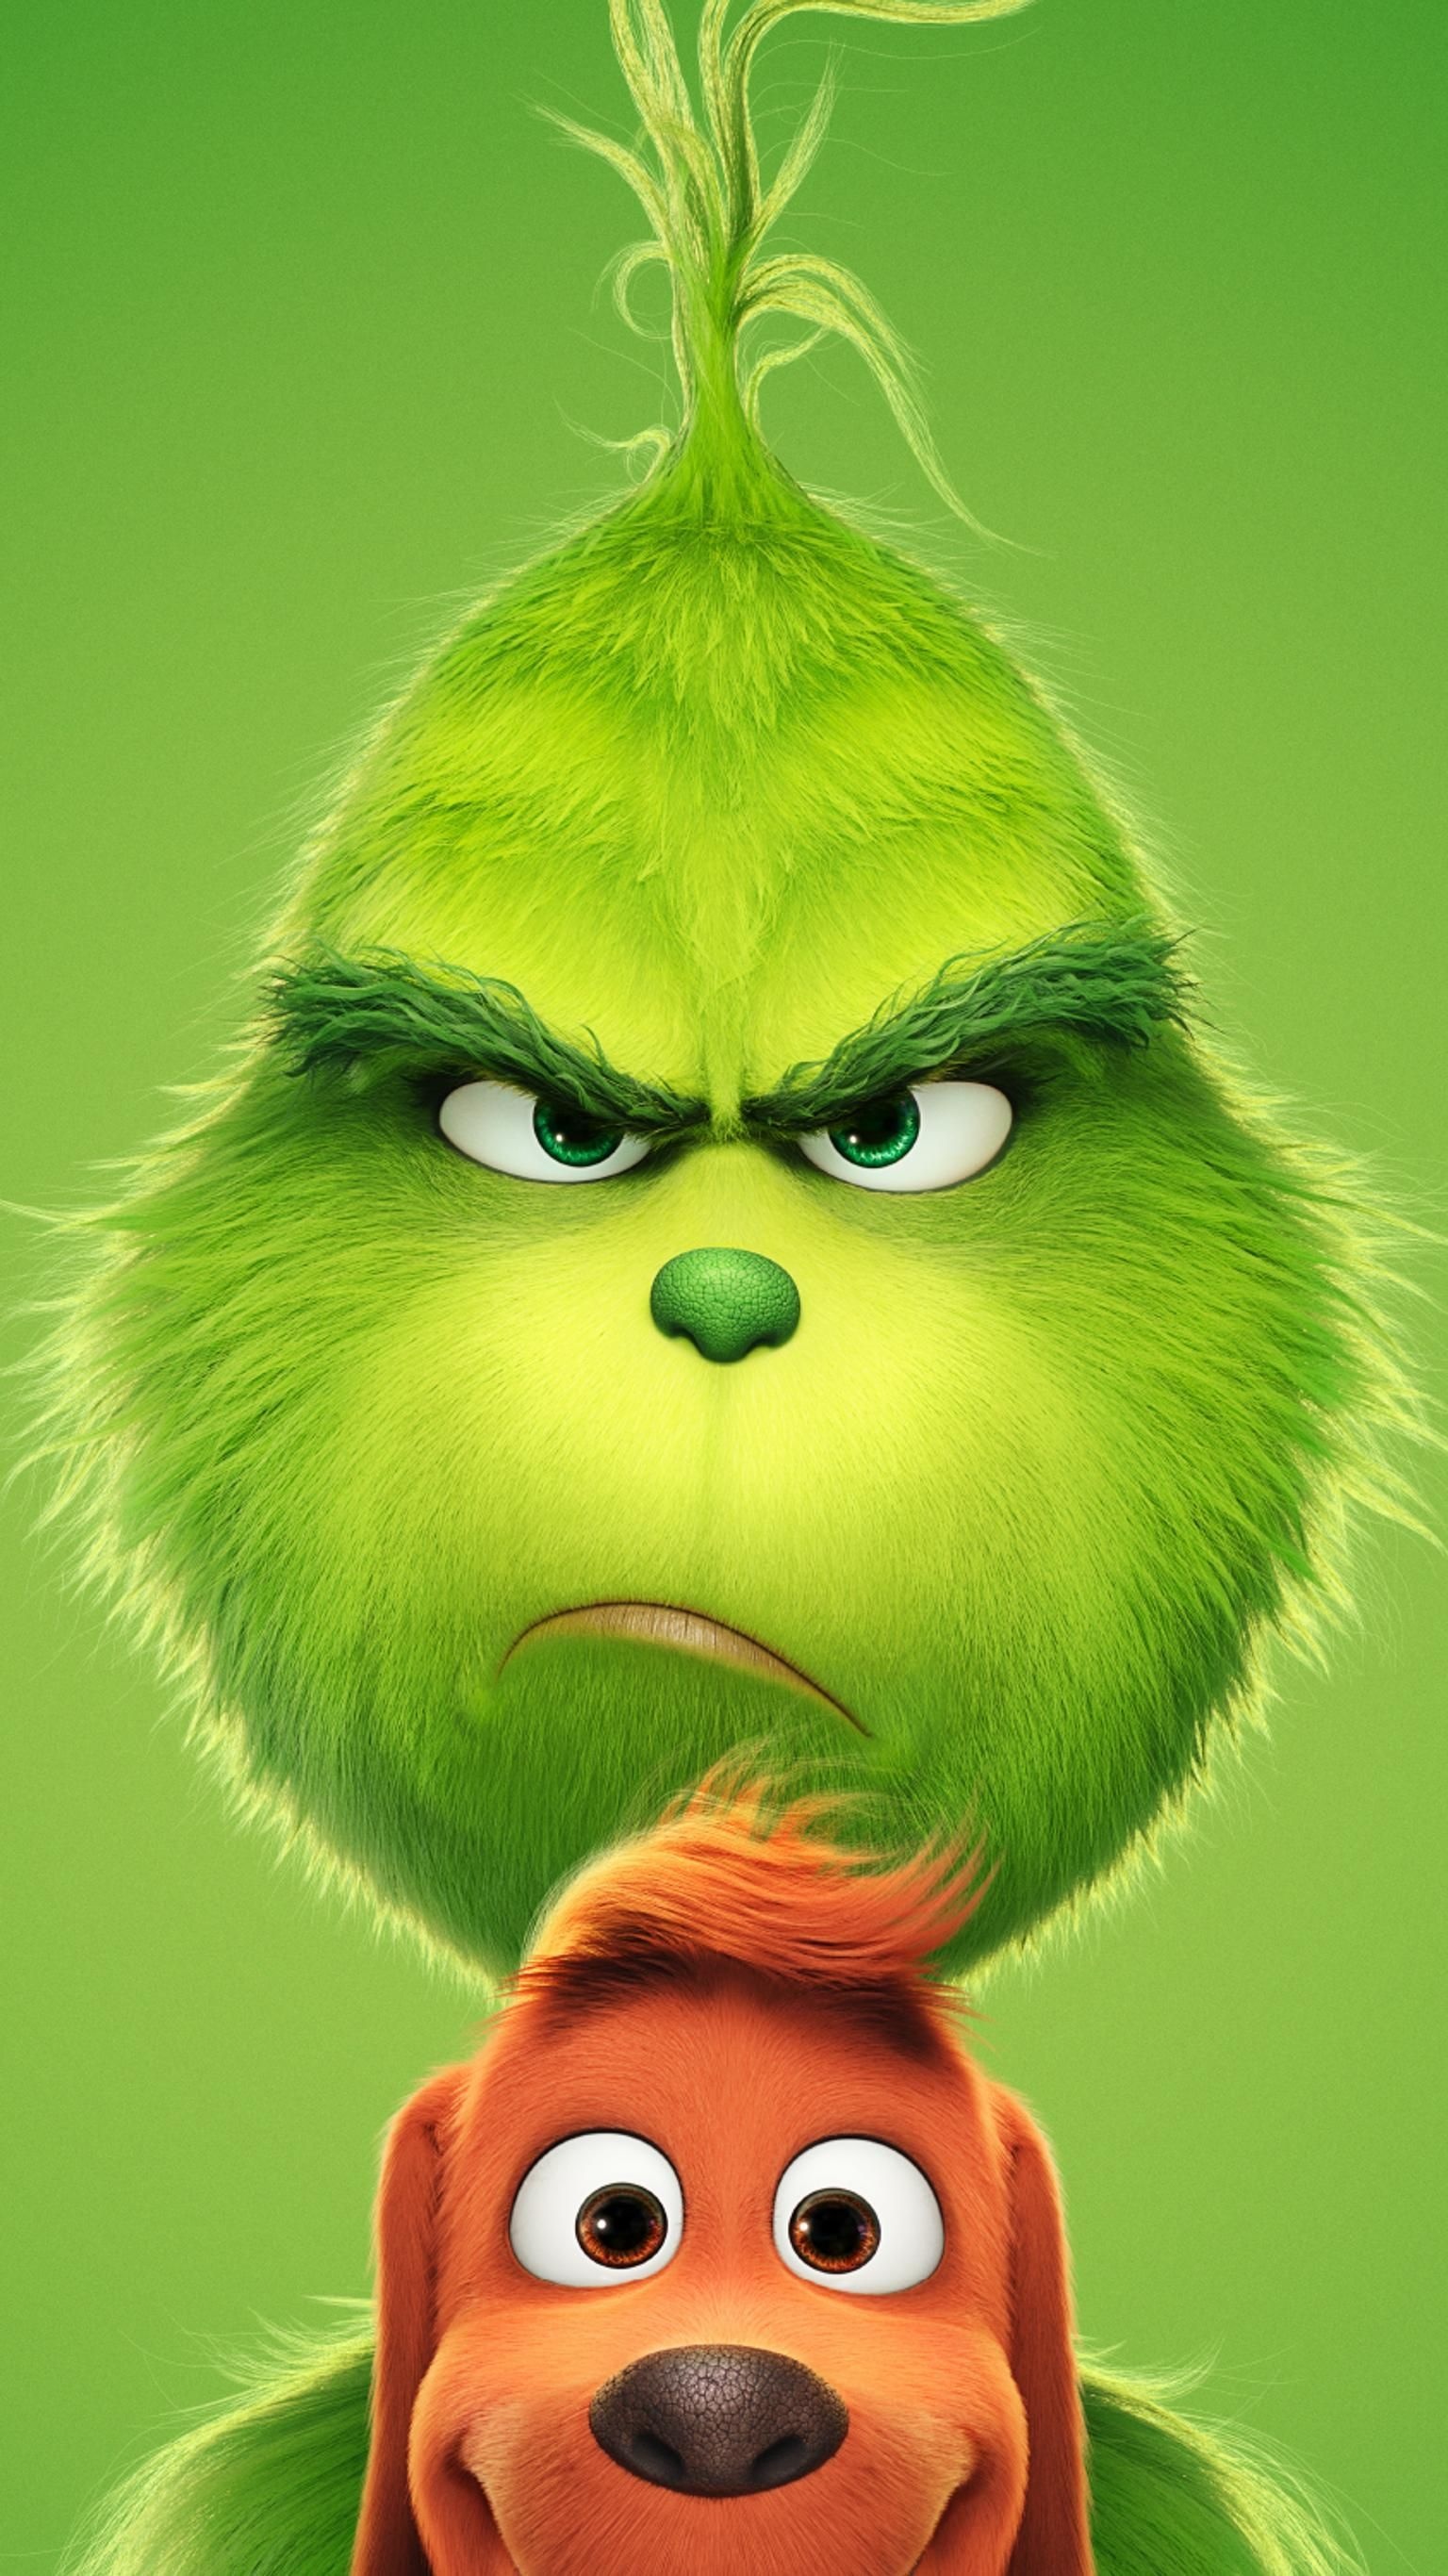 The Grinch wallpapers, Top choices, Festive backgrounds, Christmas joy, 1540x2740 HD Handy